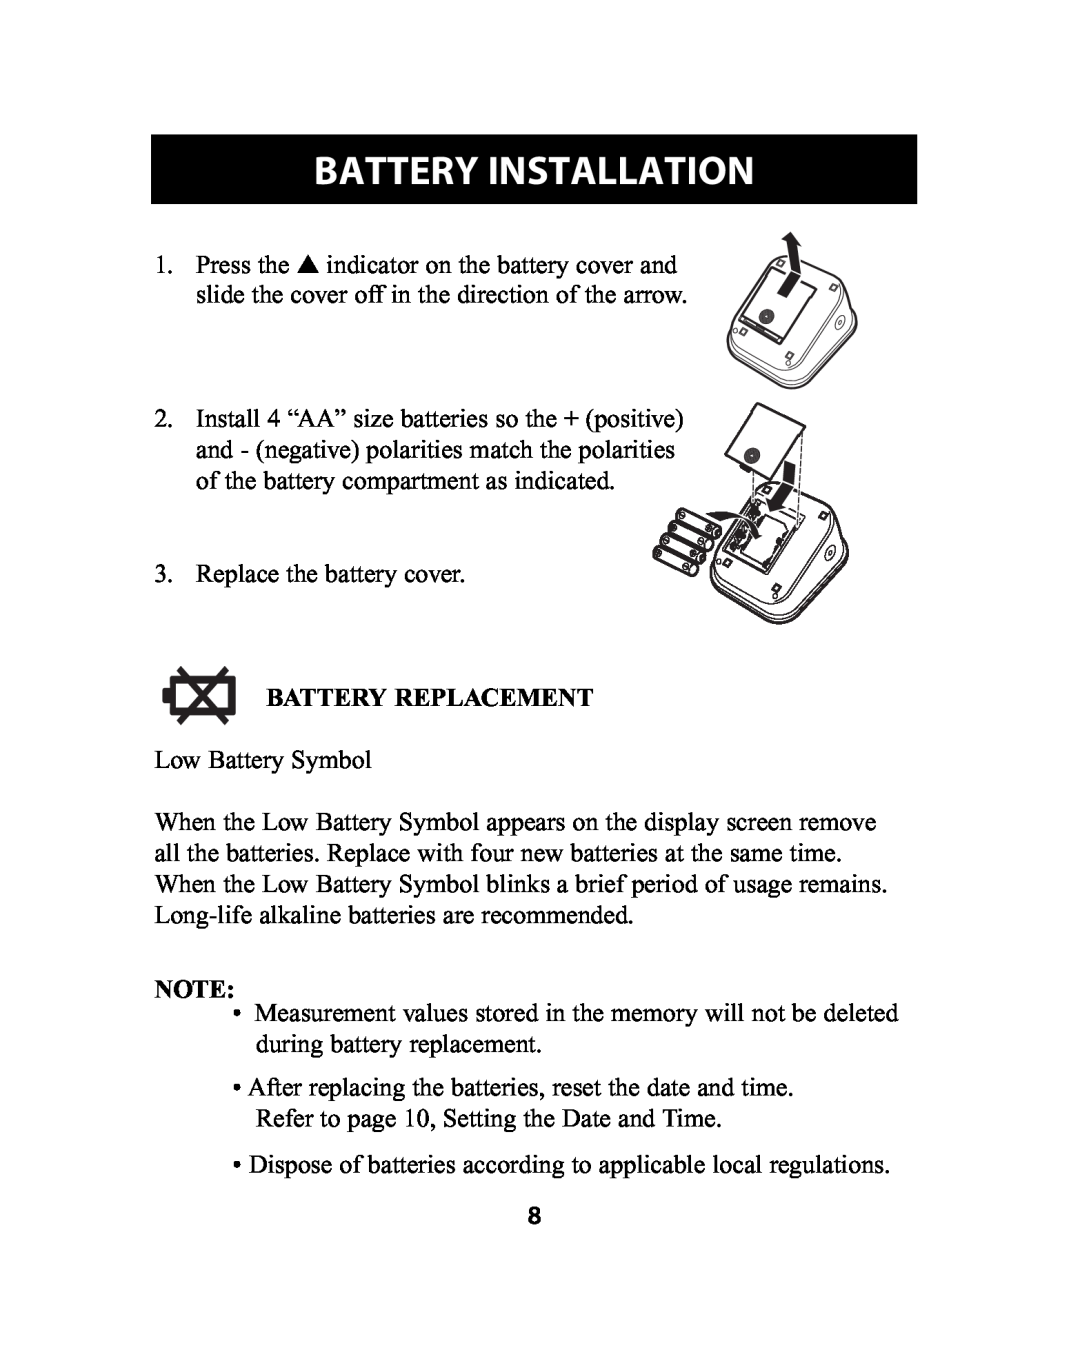 Omron Healthcare HEM-741CREL manual Battery Installation, Battery Replacement 